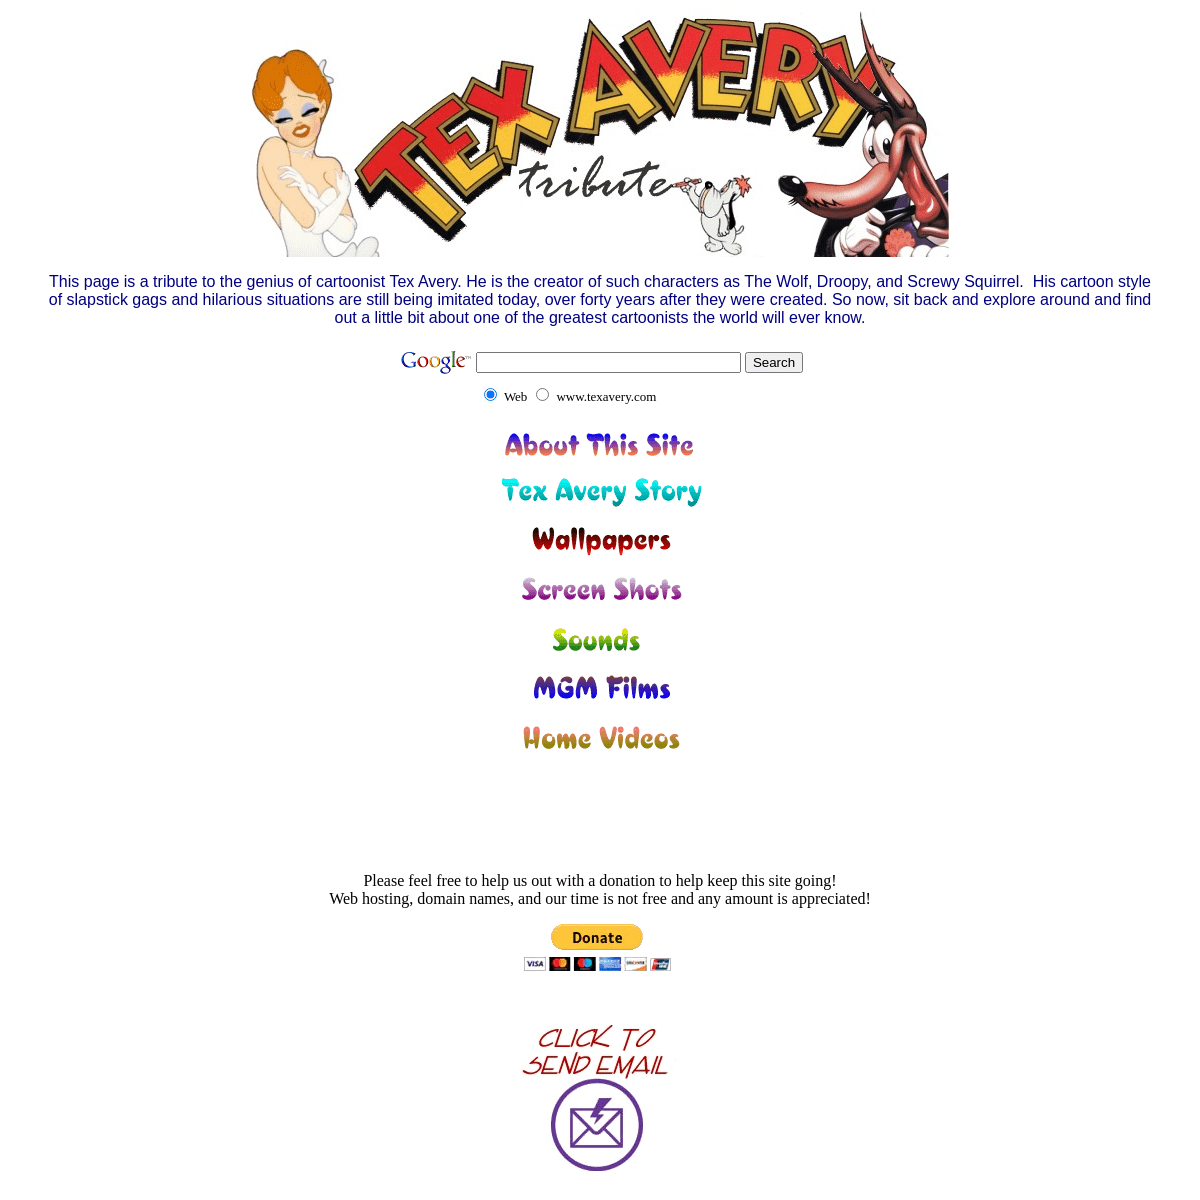 A complete backup of https://texavery.com